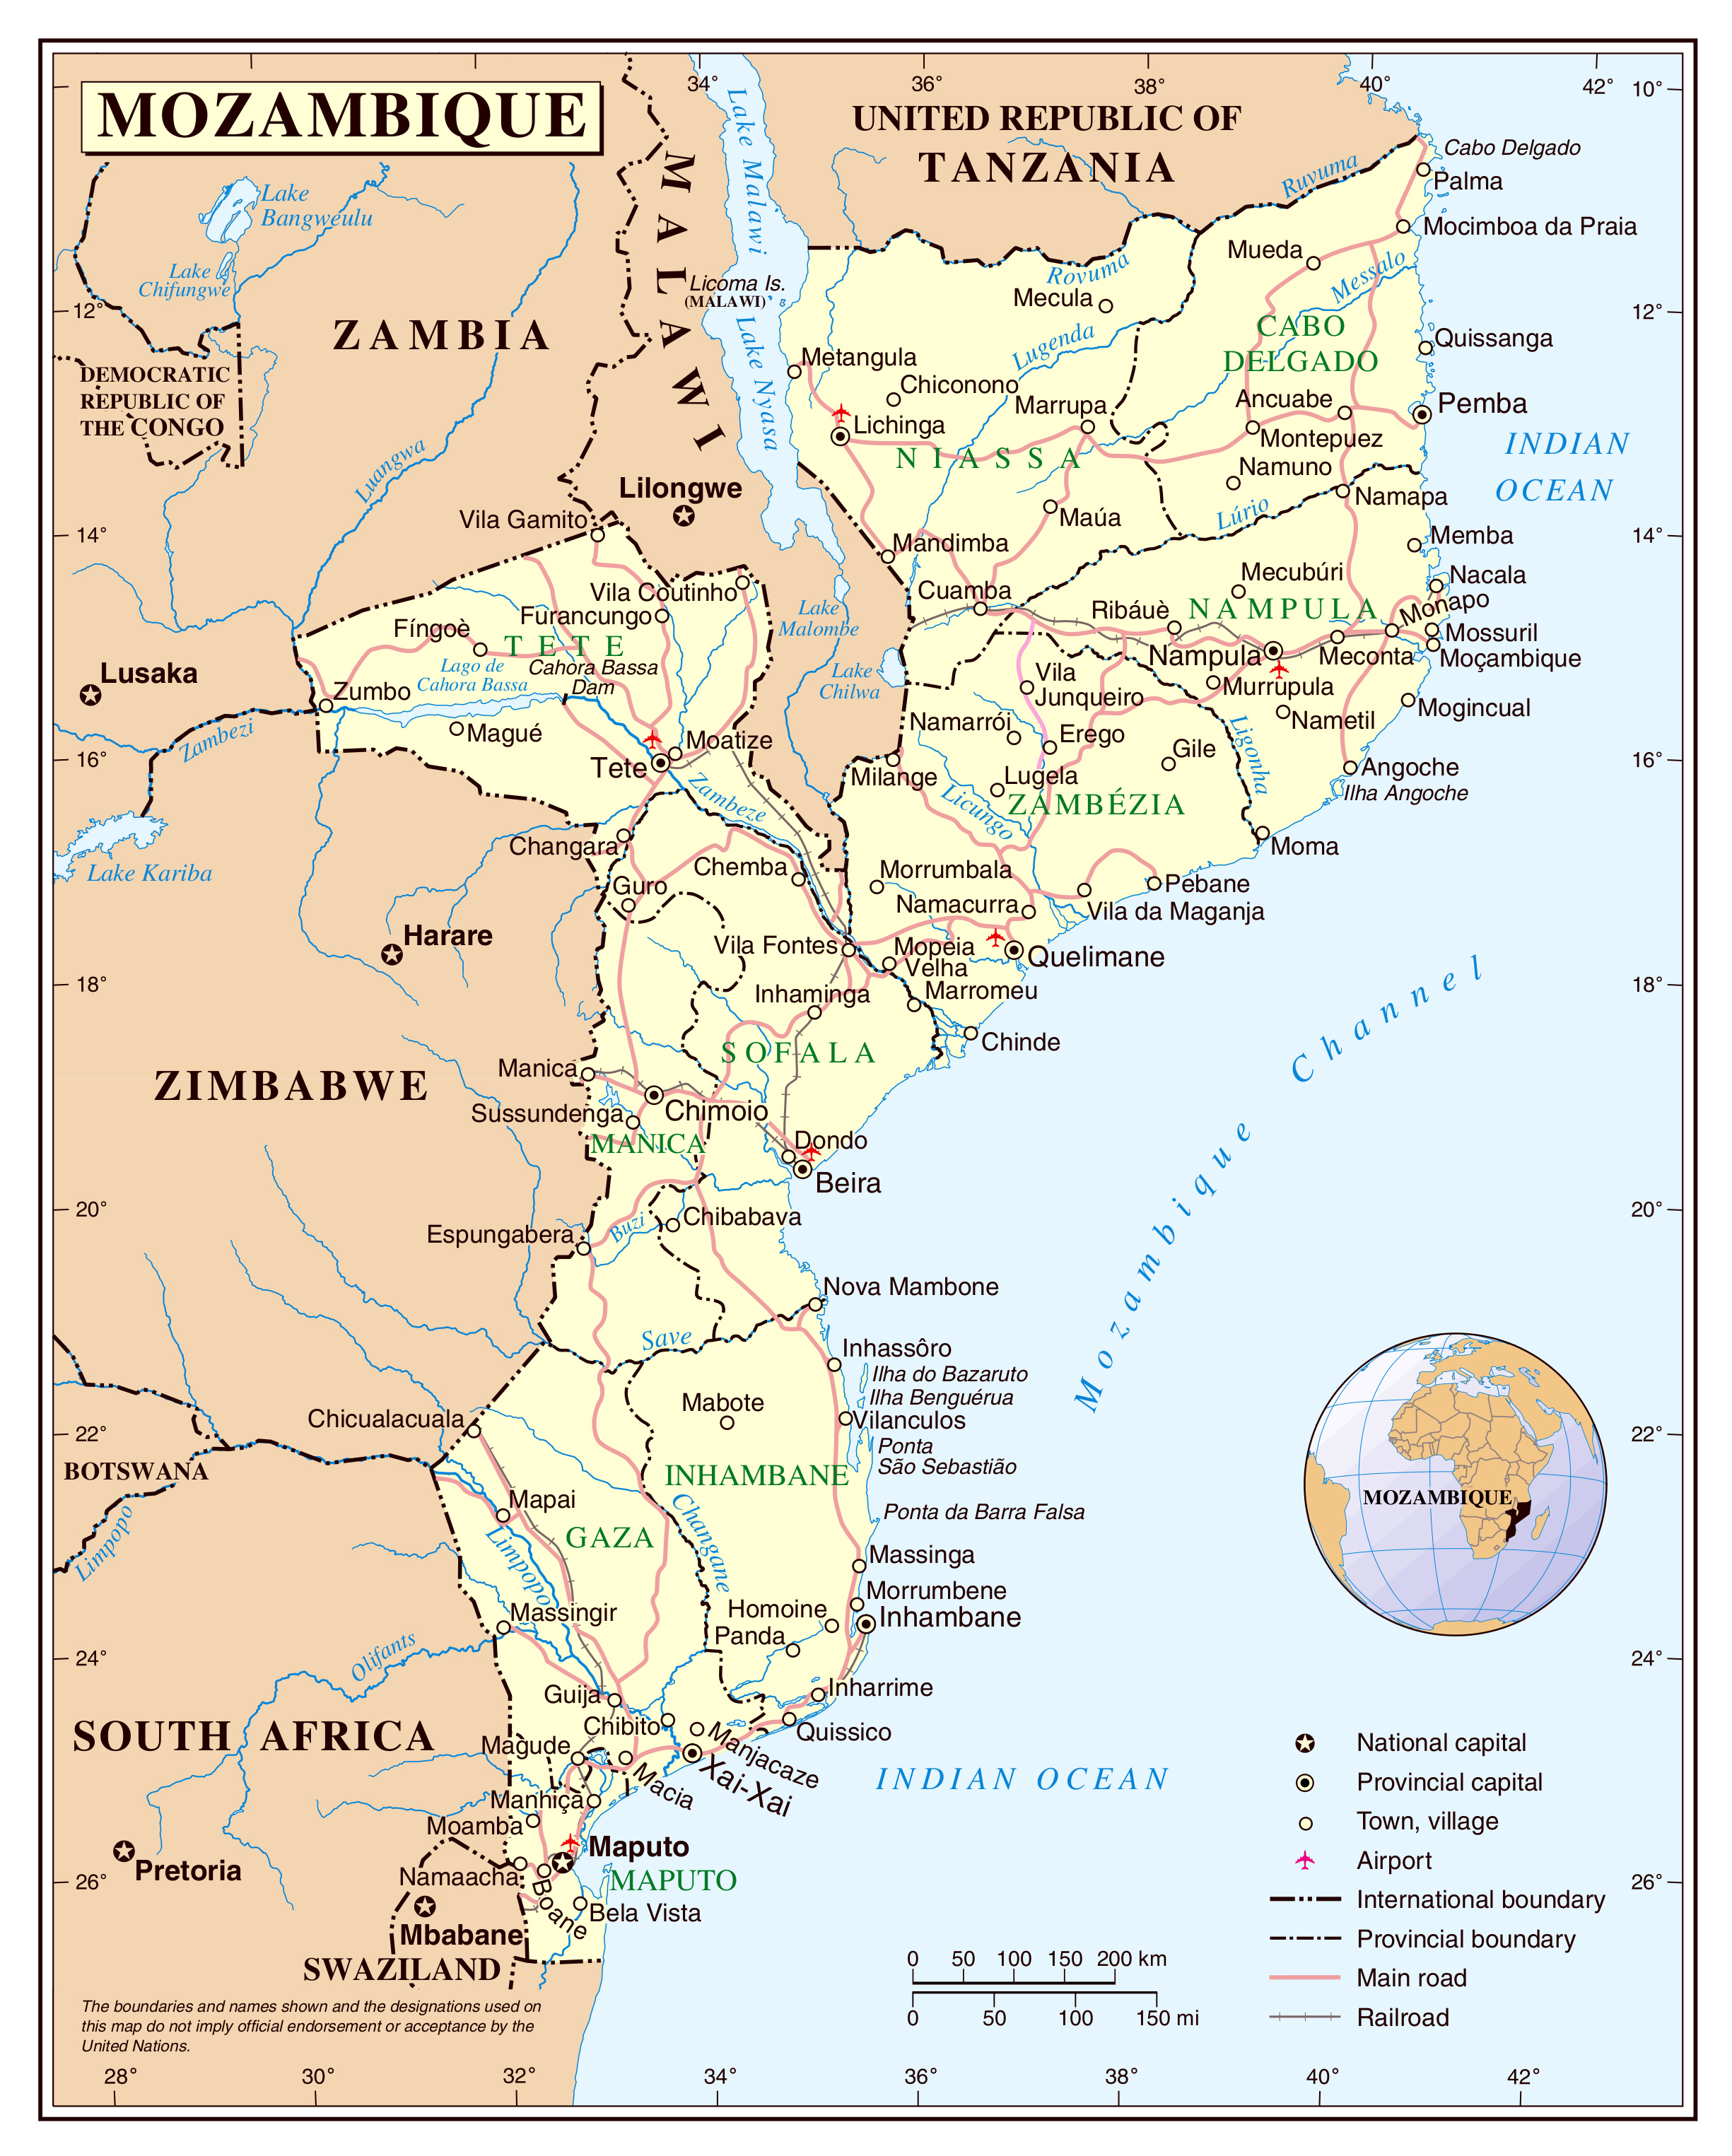 Large Detailed Political And Administrative Map Of Mozambique With Cities Roads Railroads And Airports 